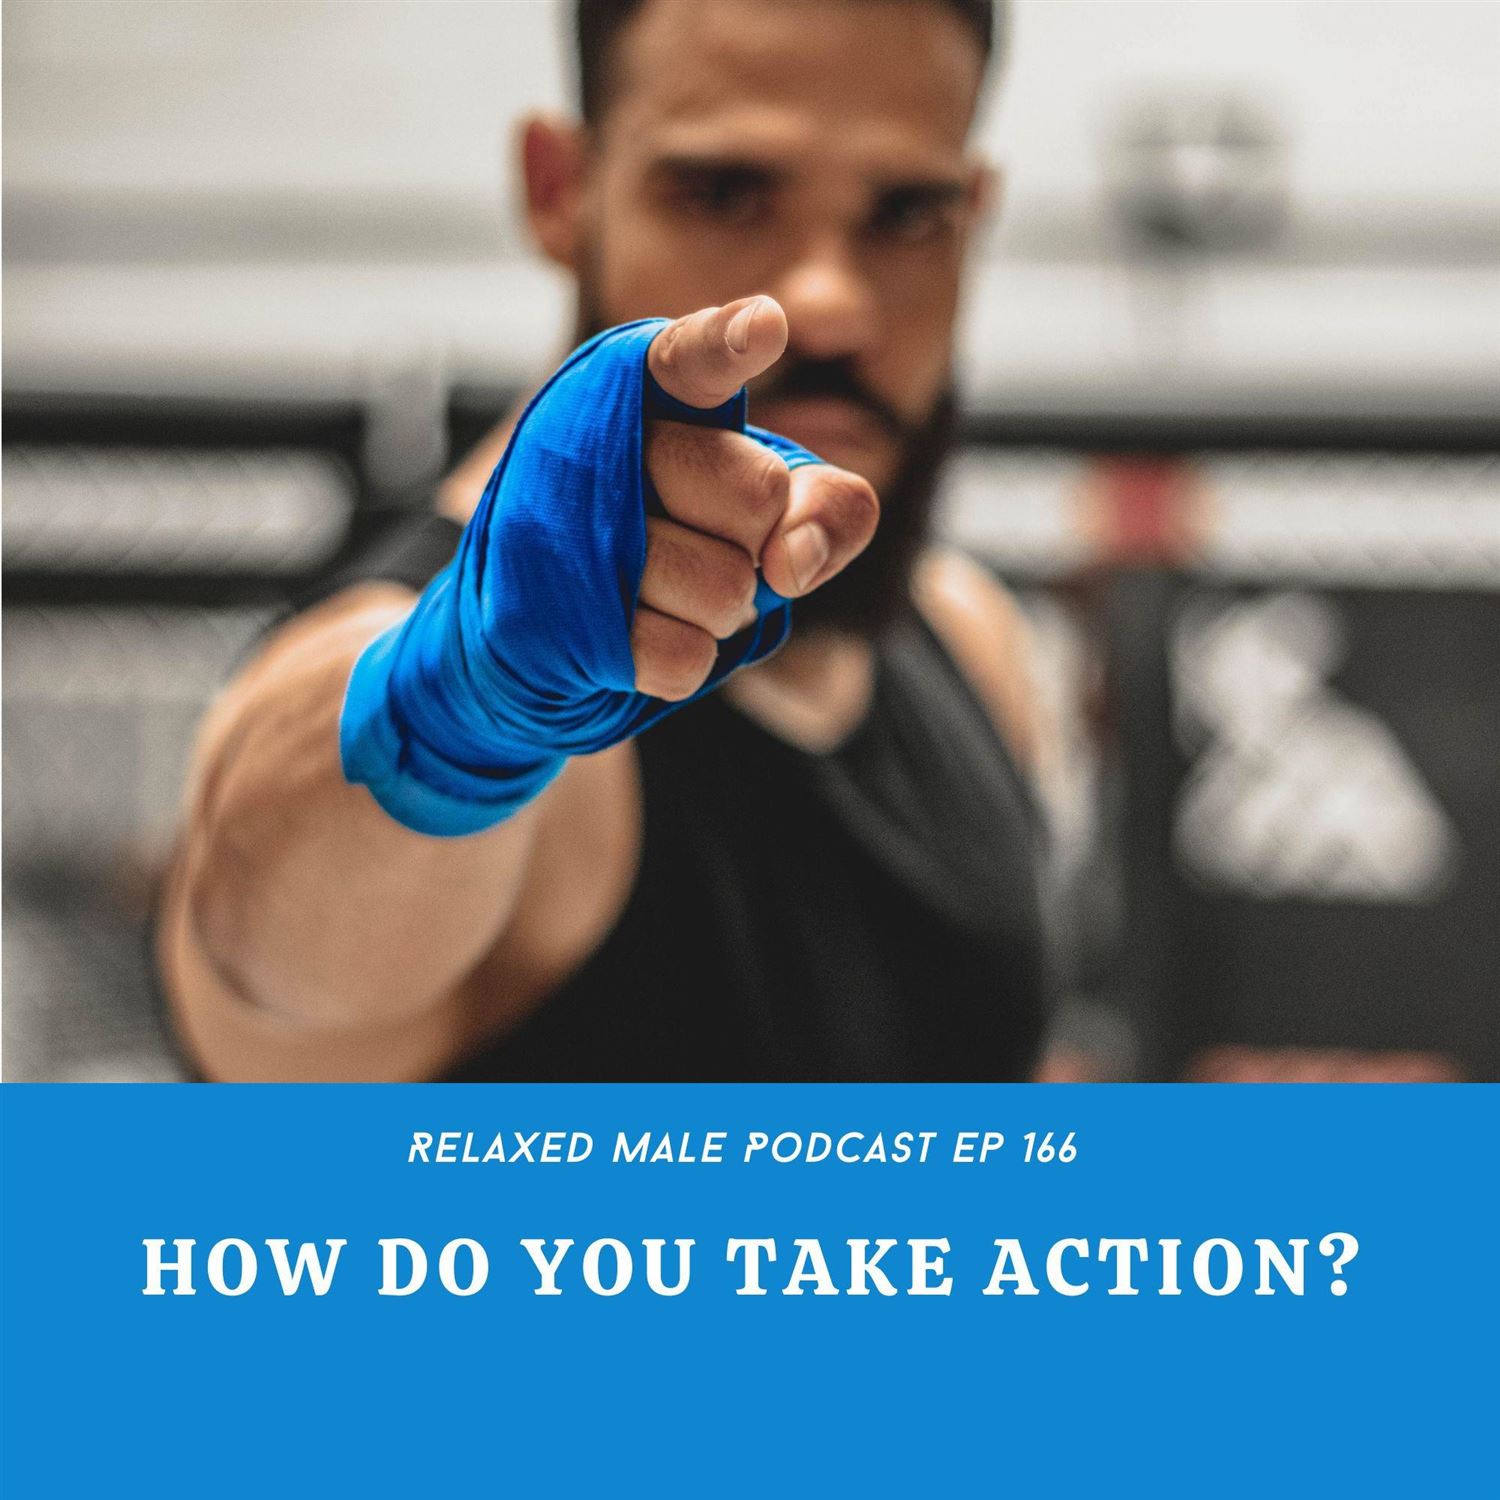 How do you take action?